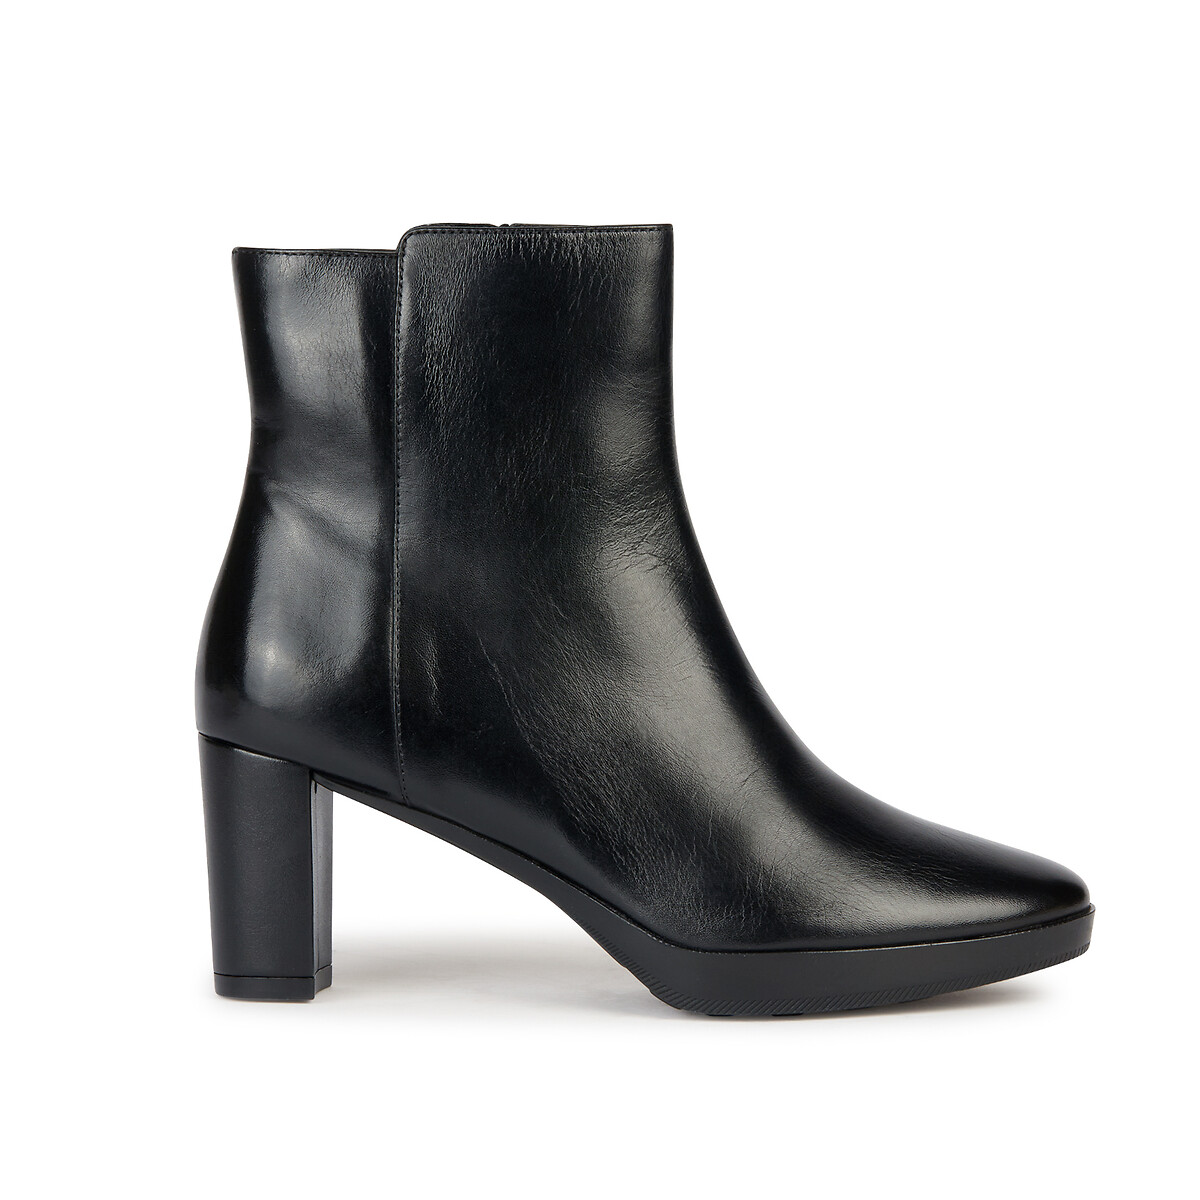 Walk Pleasure Ankle Boots in Leather with Block Heel and Zip Fastening